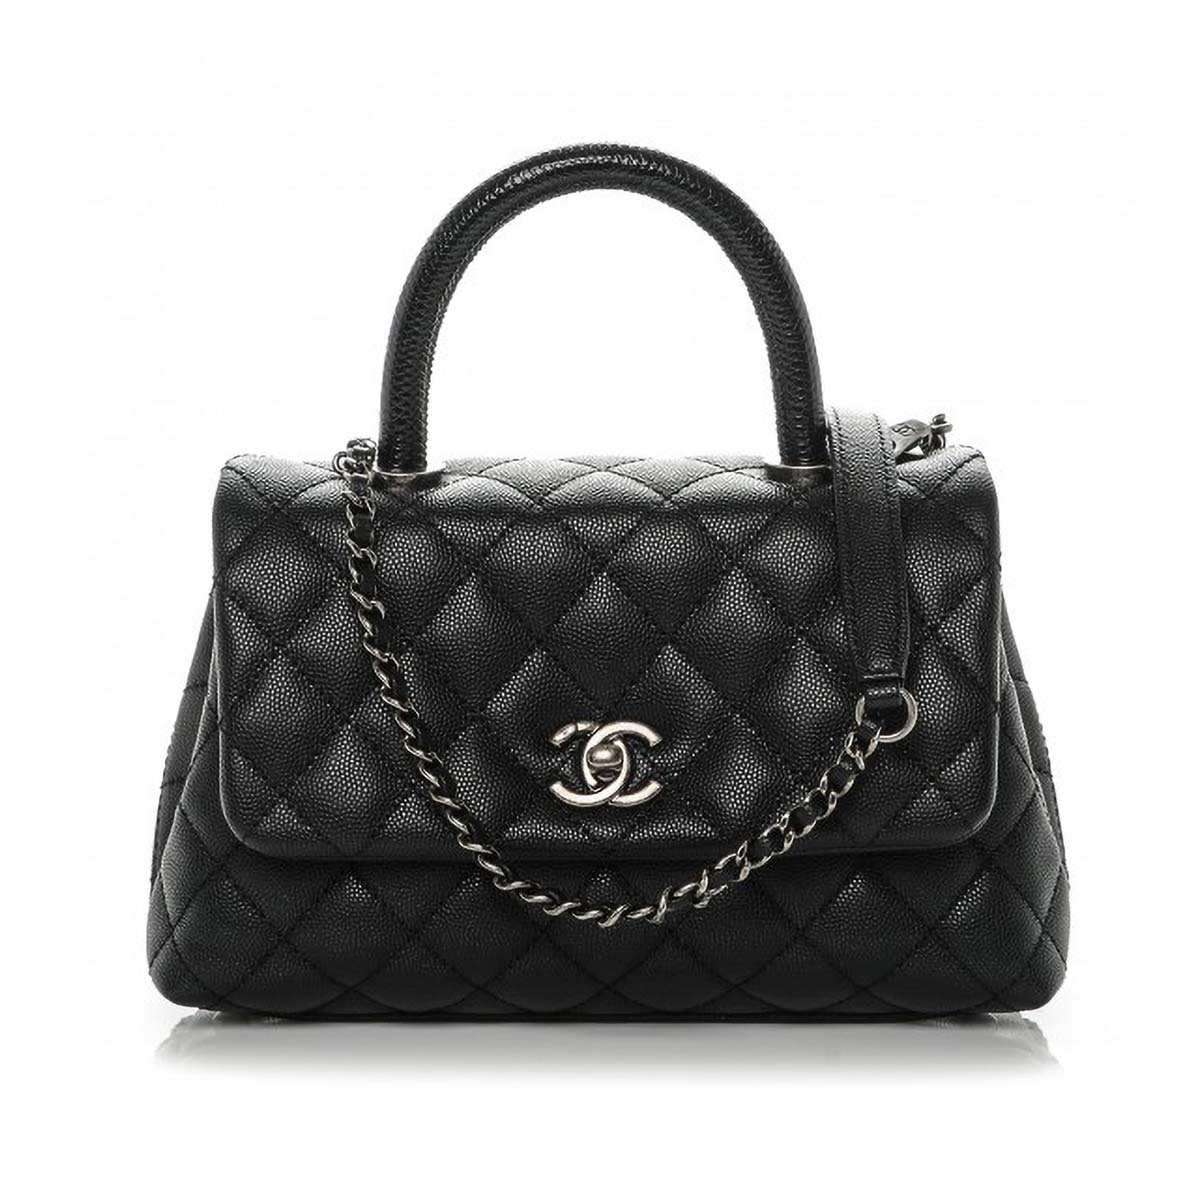 Chanel Coco Caviar Lizard Quilted Mini Flap Bag with TopHandleBlack